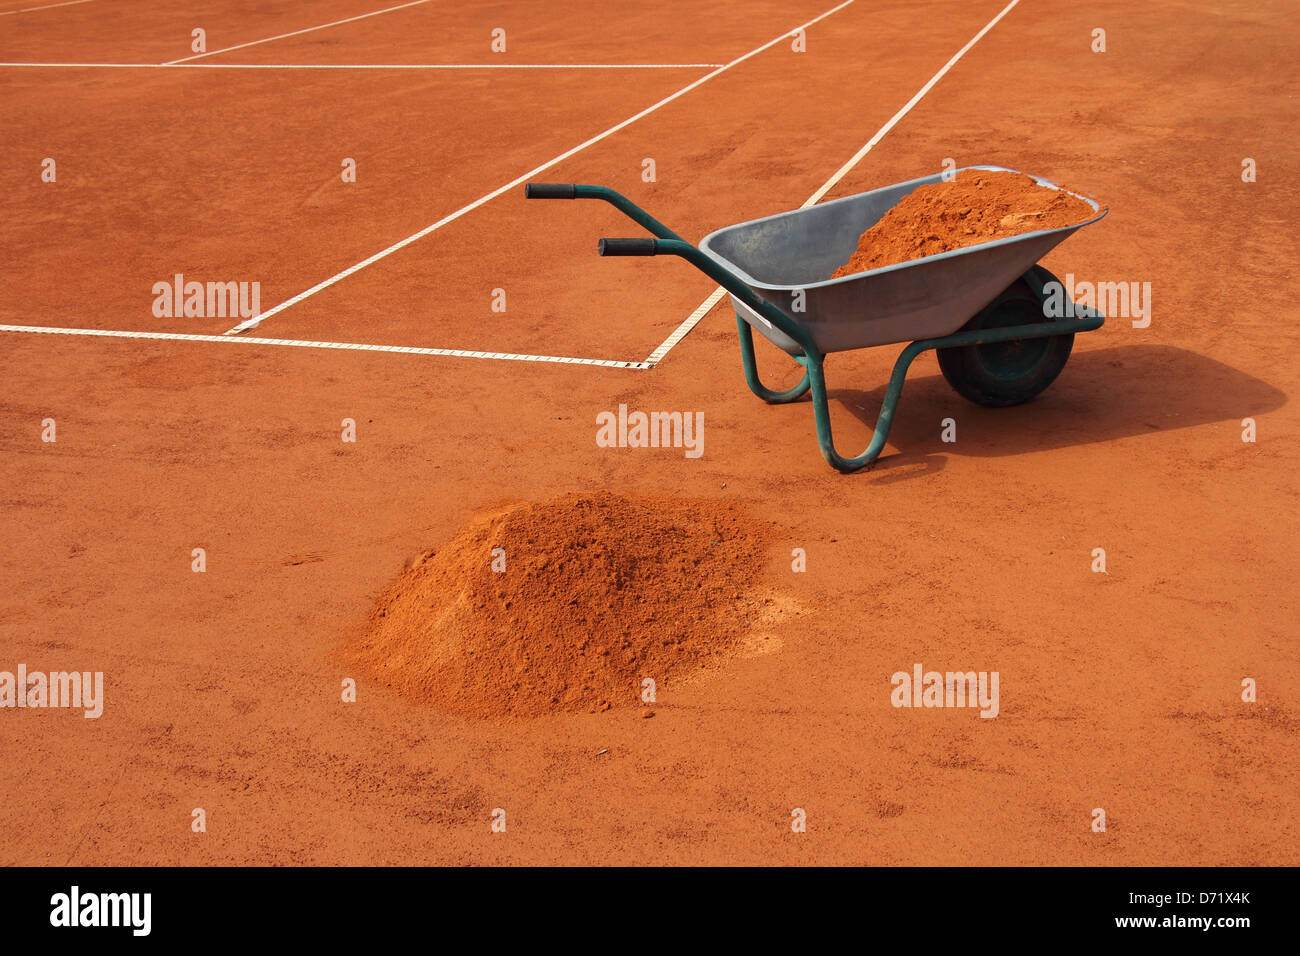 Wheelbarrow filled with red clay, on the tennis court Stock Photo